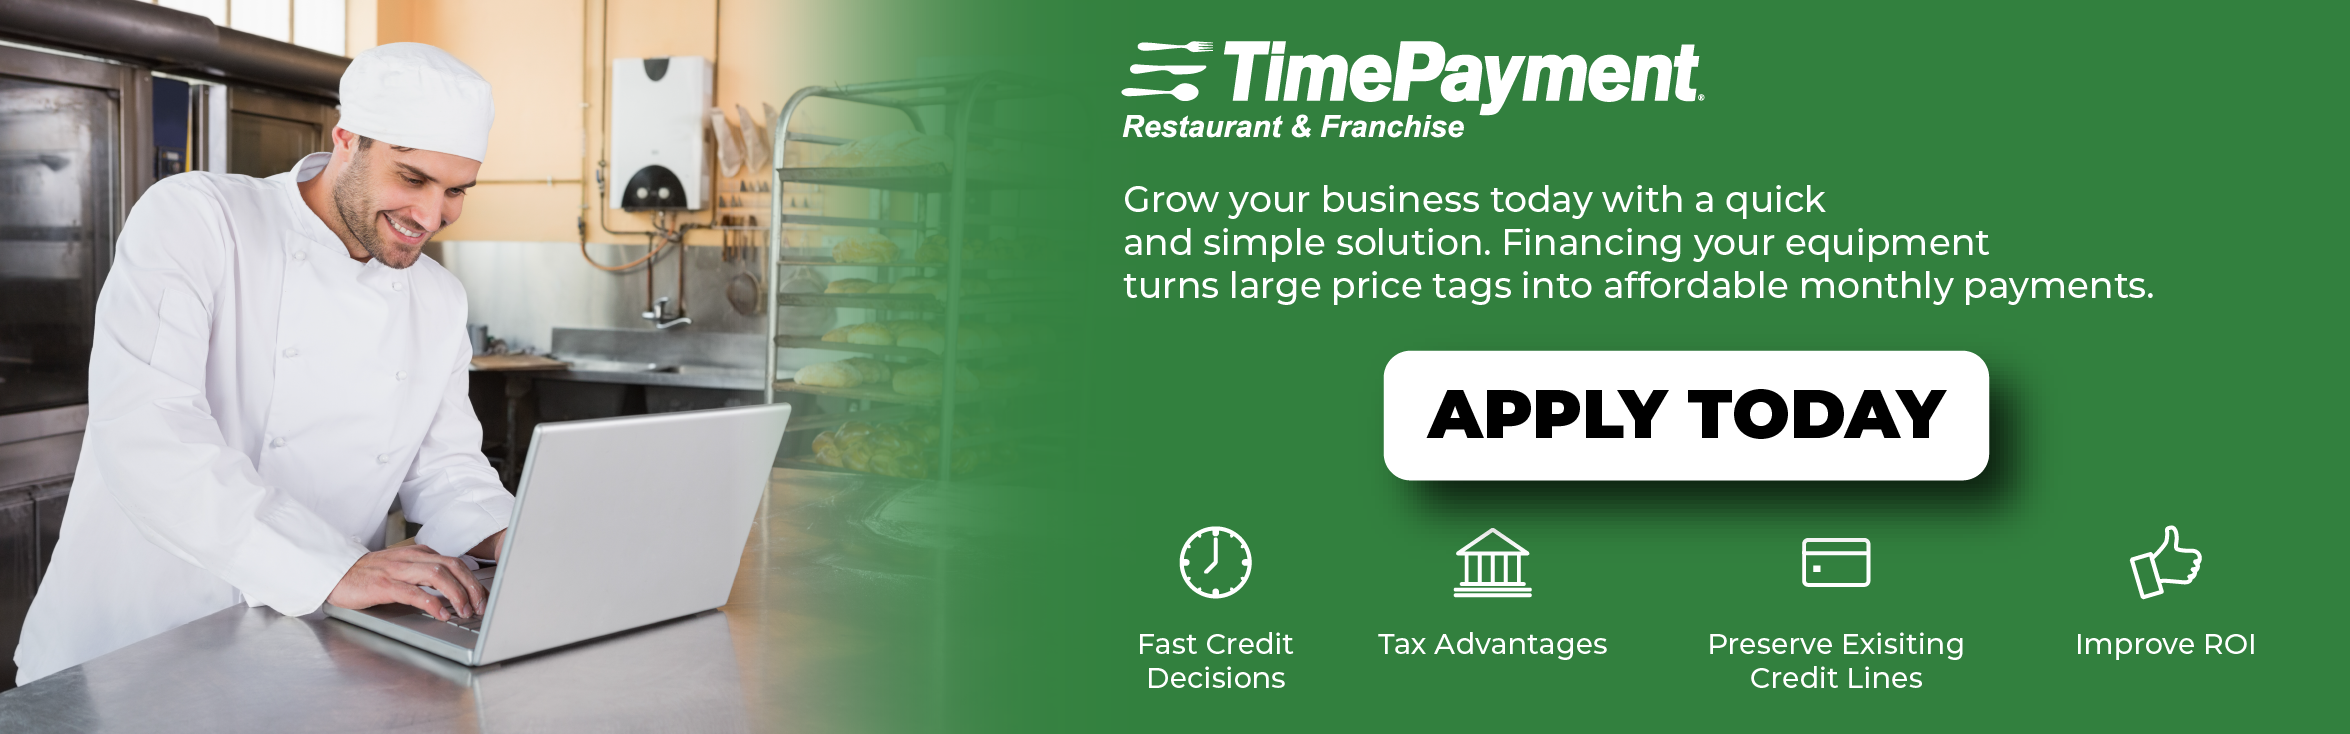 Timepayment Banner-01.png